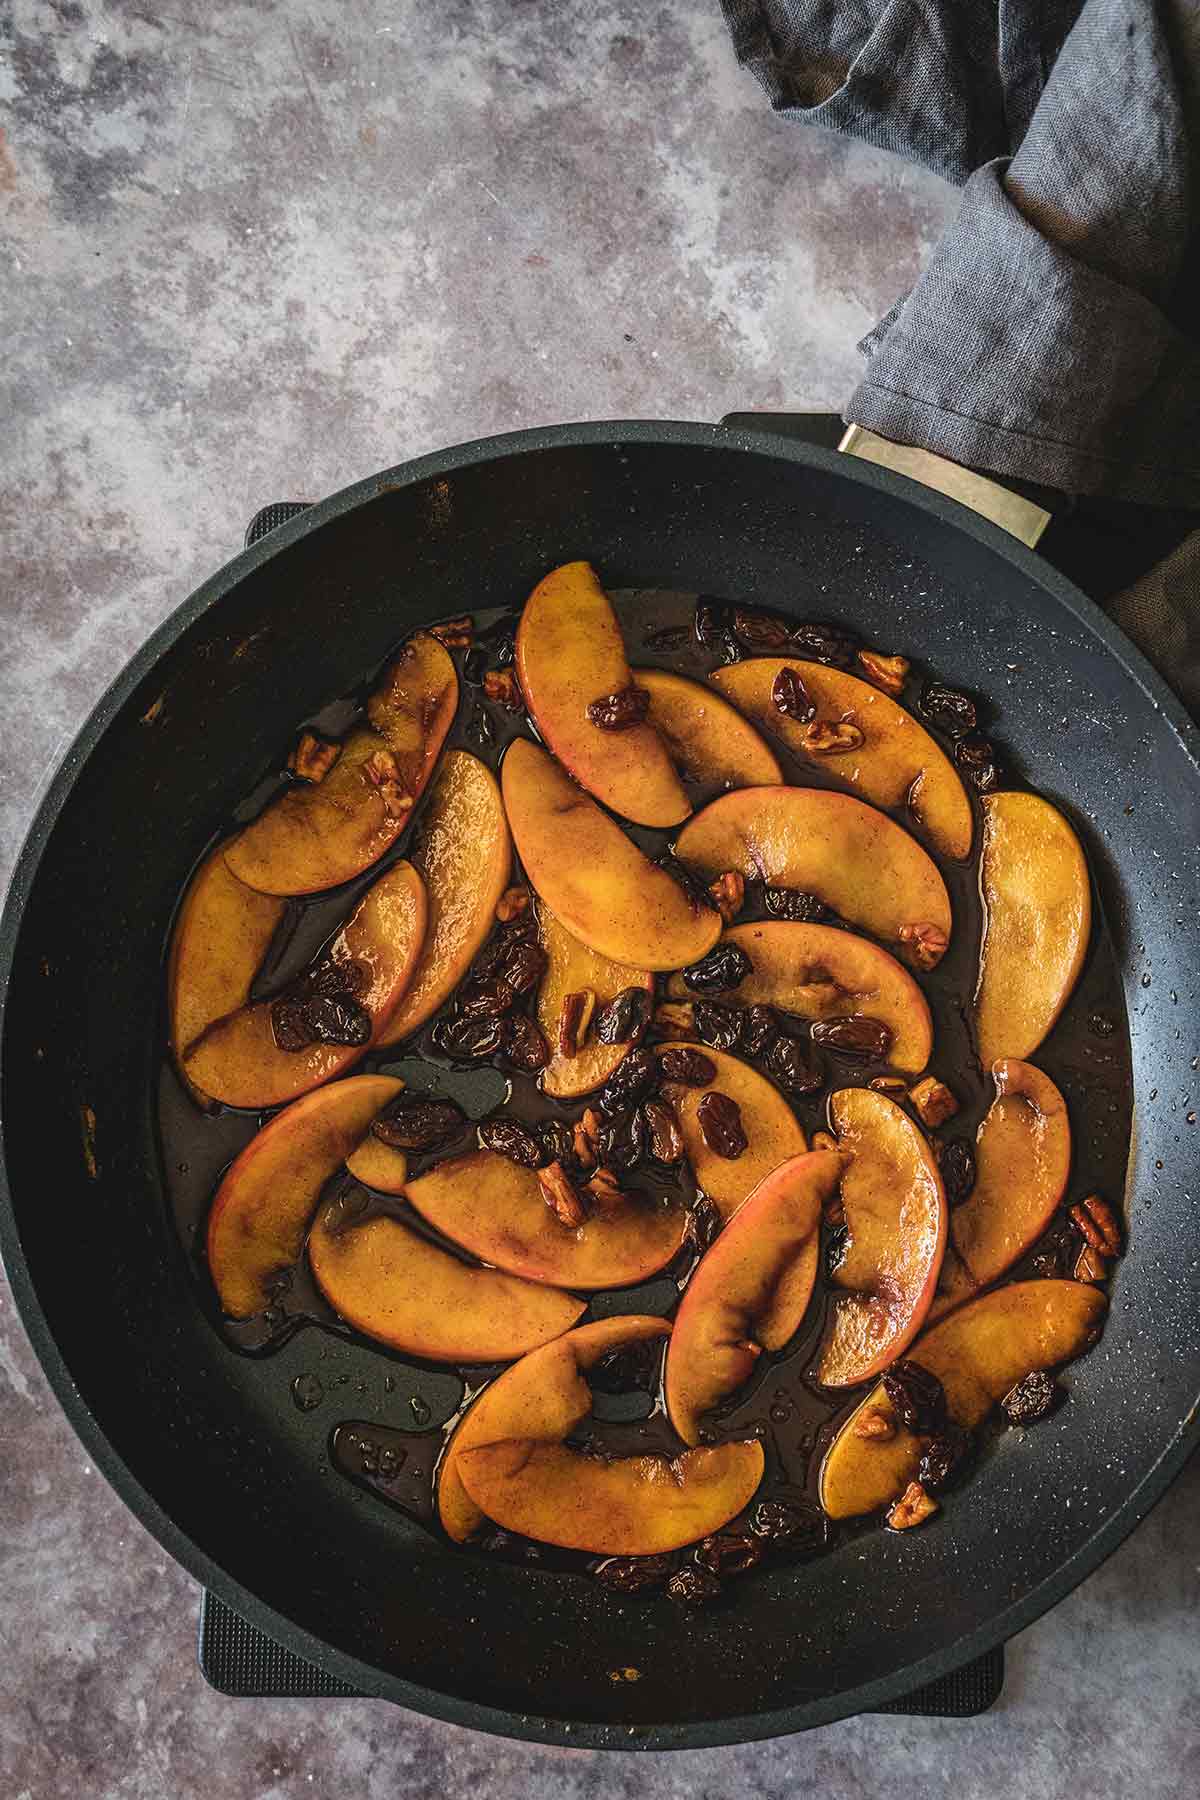 Caramelized cinnamon apples with raisins in the skillet